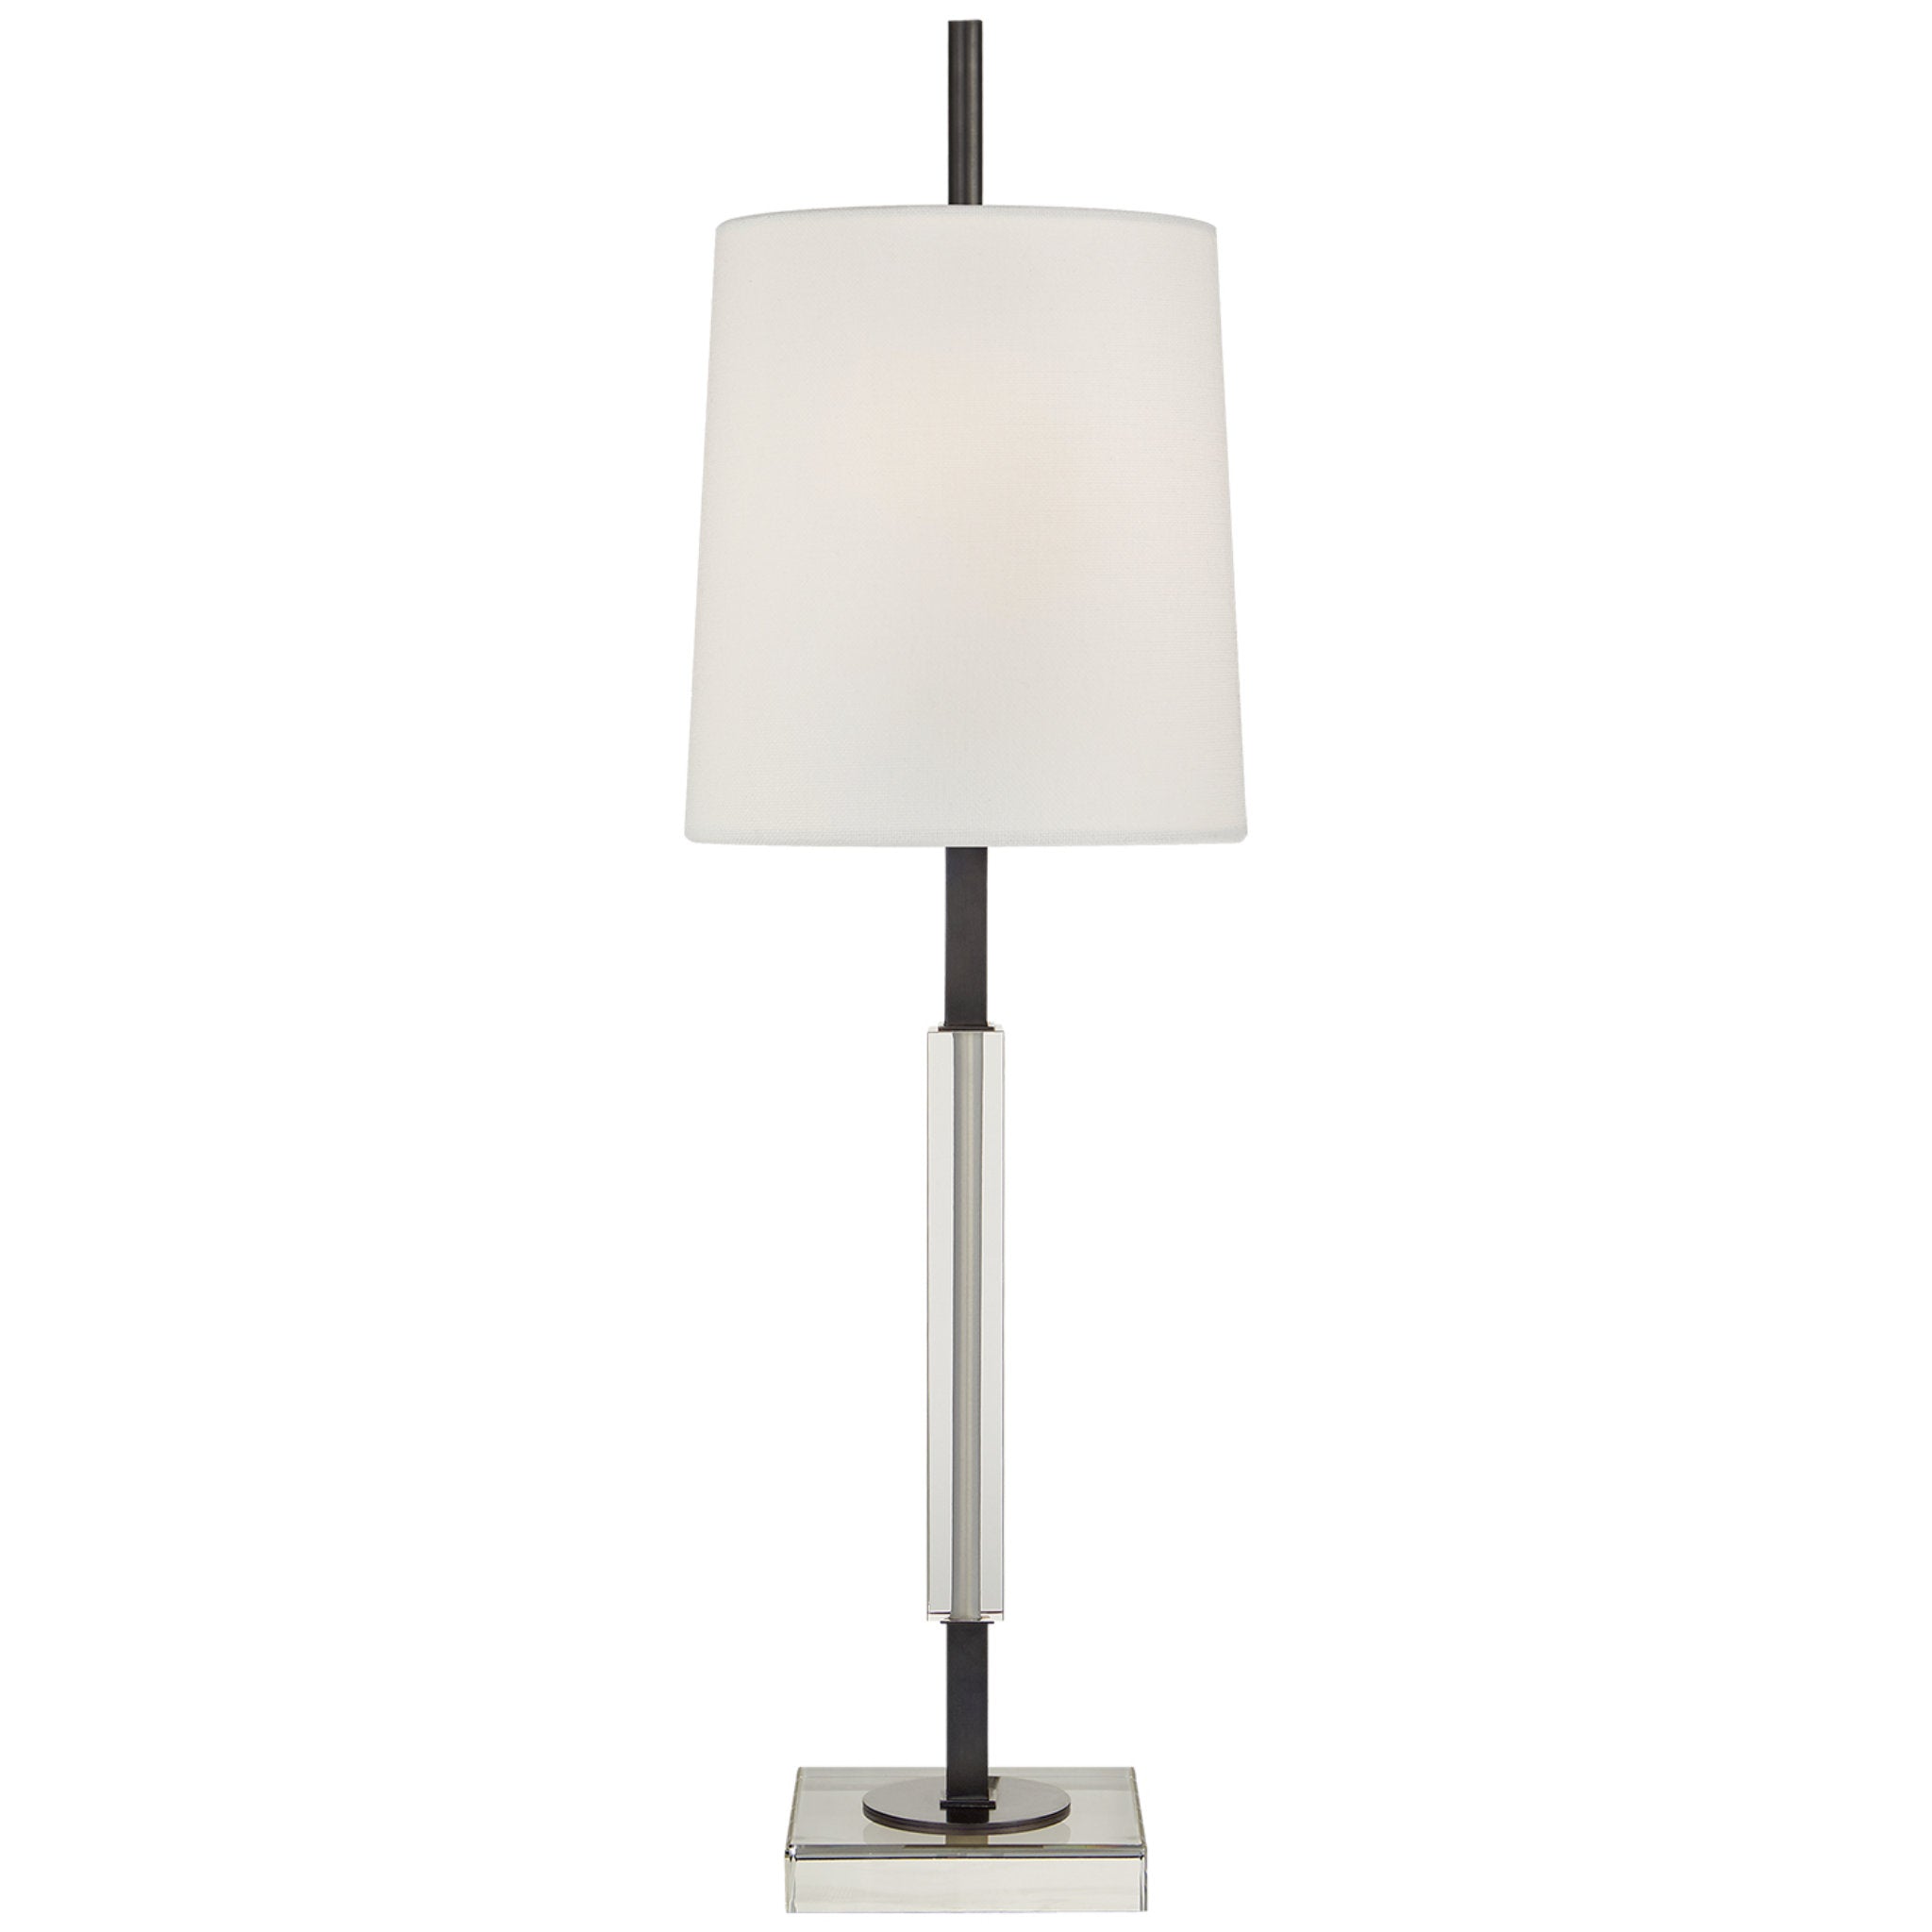 Thomas O'Brien Lexington Medium Table Lamp in Bronze and Crystal with Linen Shade